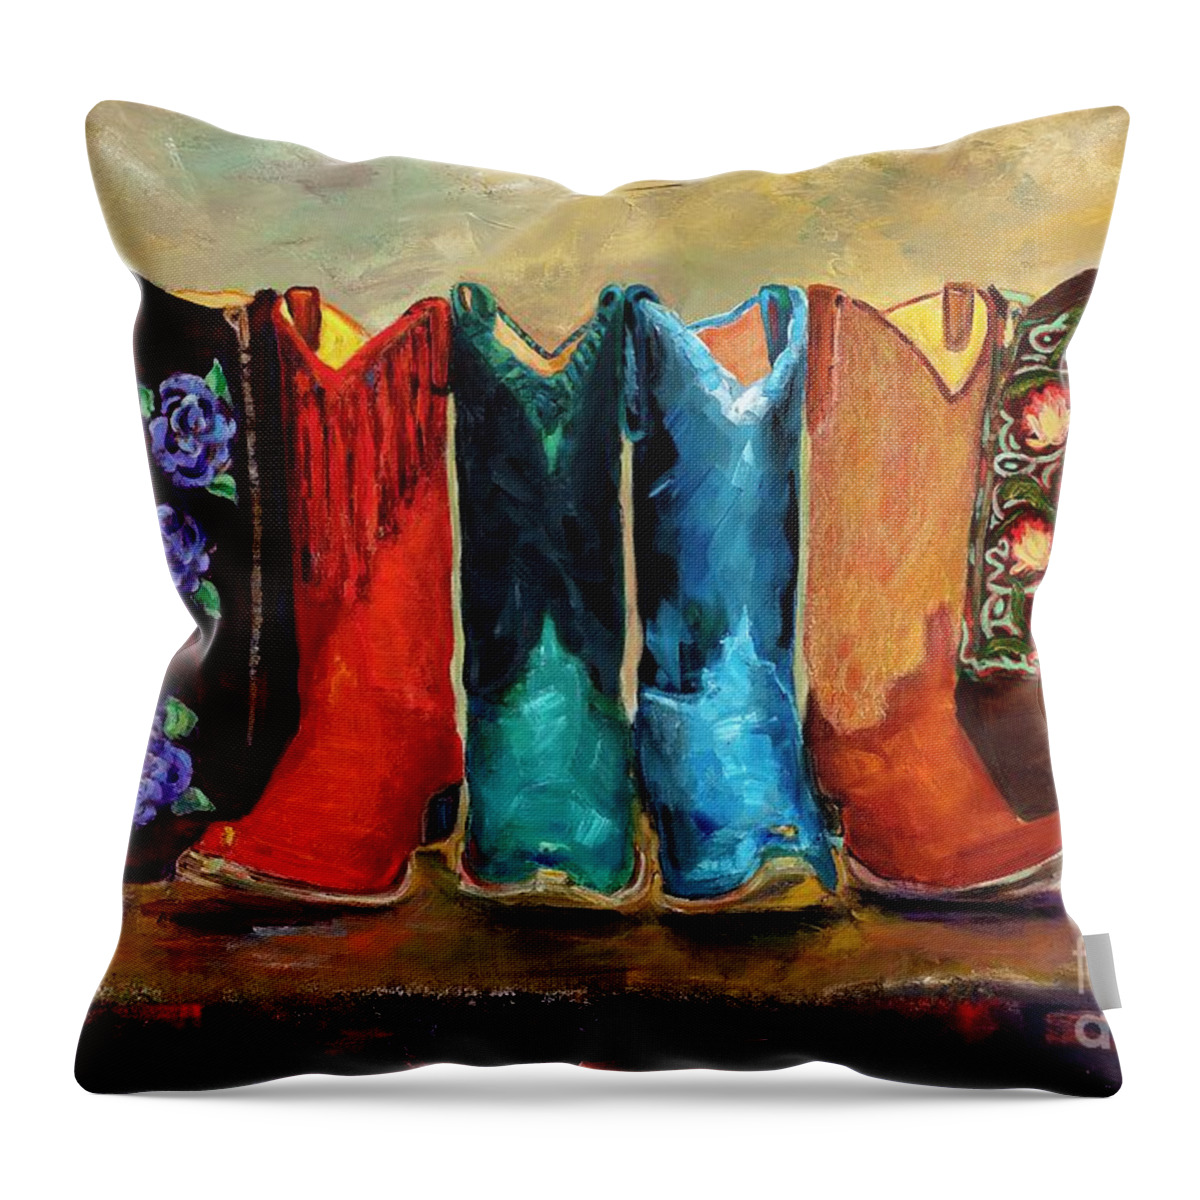 Cowboy Boots Throw Pillow featuring the painting The Girls Are Back In Town by Frances Marino